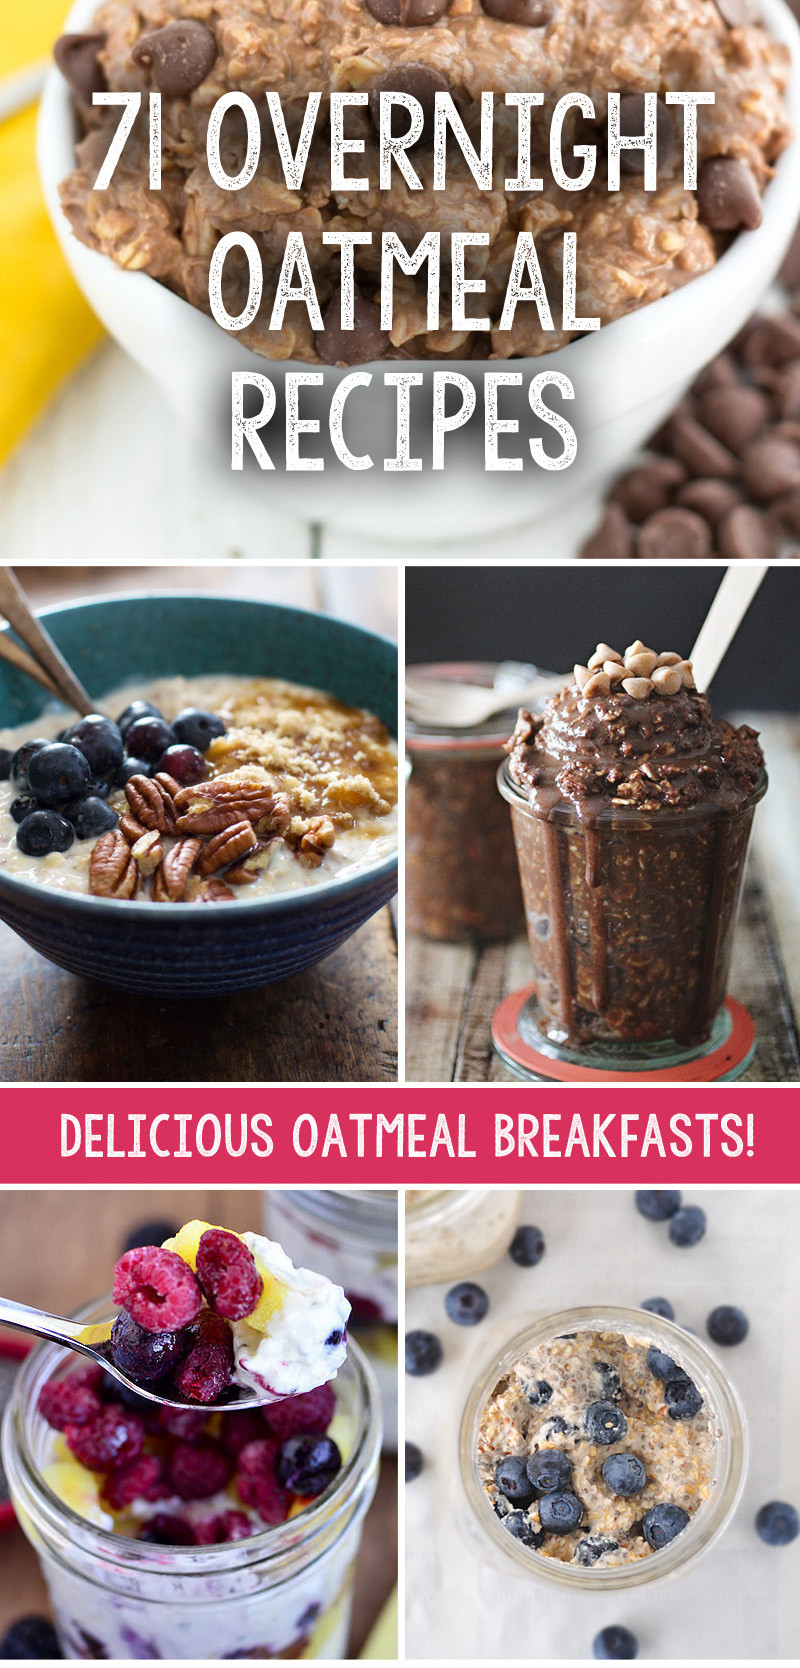 Overnight Oats Weight Loss
 We have collected 71 incredible overnight oatmeal recipes